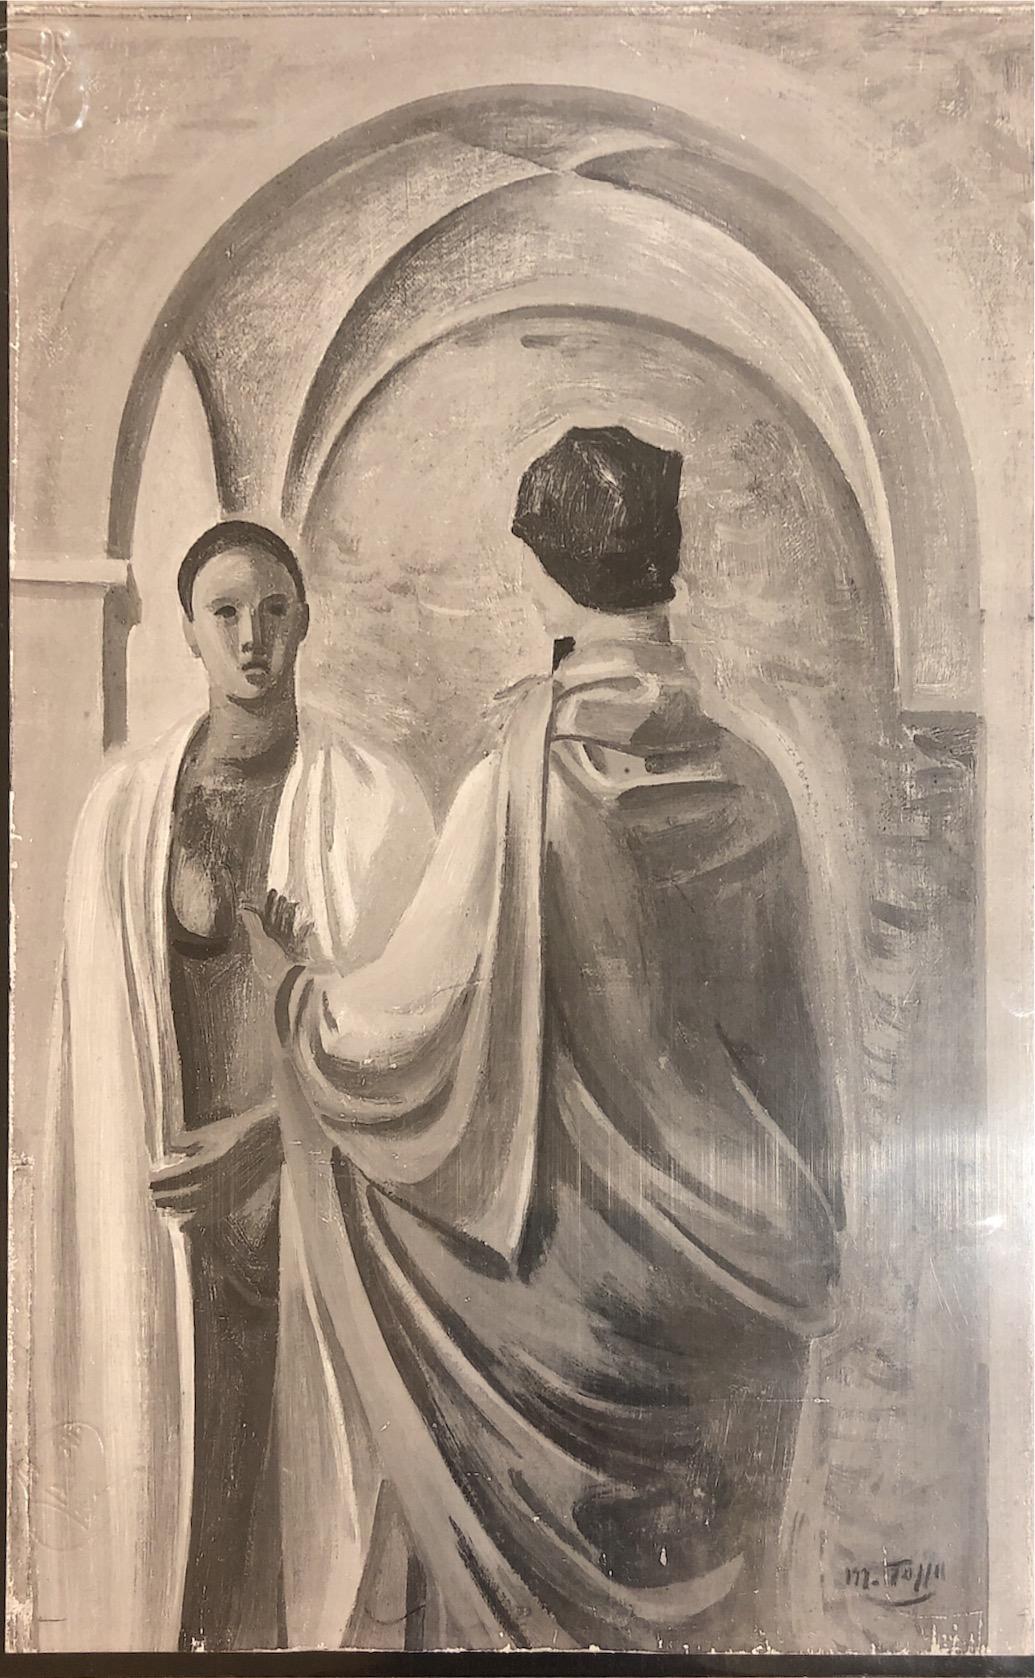 Oil on canvas, representing two human figures gently speaking, this 1943 painting by Mario Tozzi has been authenticated by the official Archive of Mario Tozzi ( see reference Arch.772 - Cat.43/7). Size: 62 x 40 cm. Red signature on the bottom right